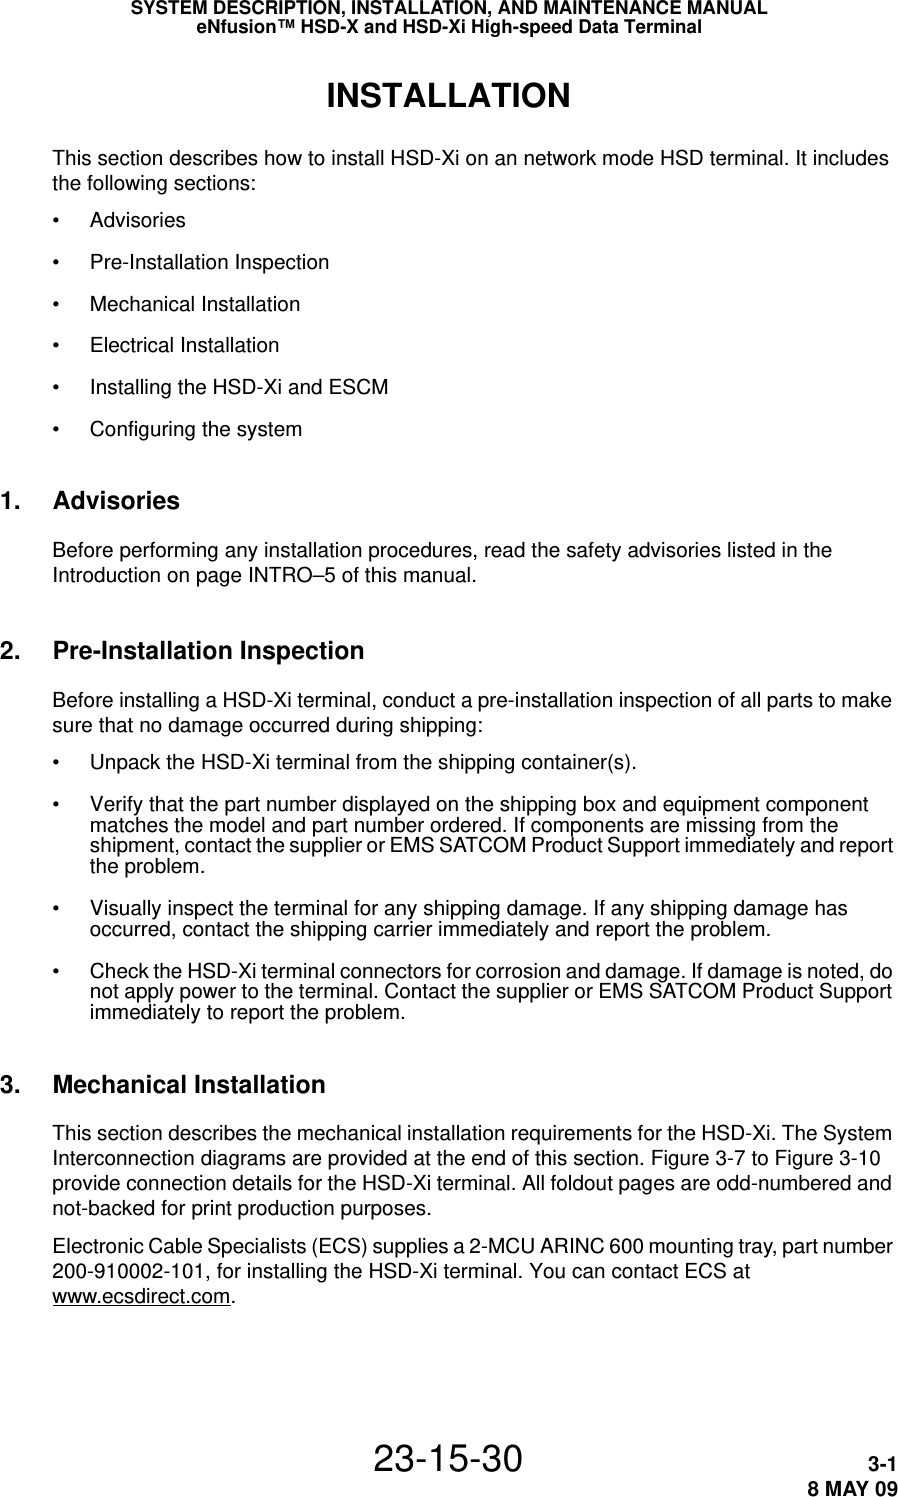 SYSTEM DESCRIPTION, INSTALLATION, AND MAINTENANCE MANUALeNfusion™ HSD-X and HSD-Xi High-speed Data Terminal23-15-30 3-18 MAY 09INSTALLATIONThis section describes how to install HSD-Xi on an network mode HSD terminal. It includes the following sections:•Advisories•Pre-Installation Inspection•Mechanical Installation•Electrical Installation•Installing the HSD-Xi and ESCM•Configuring the system1. AdvisoriesBefore performing any installation procedures, read the safety advisories listed in the Introduction on page INTRO–5 of this manual.2. Pre-Installation InspectionBefore installing a HSD-Xi terminal, conduct a pre-installation inspection of all parts to make sure that no damage occurred during shipping:• Unpack the HSD-Xi terminal from the shipping container(s). • Verify that the part number displayed on the shipping box and equipment component matches the model and part number ordered. If components are missing from the shipment, contact the supplier or EMS SATCOM Product Support immediately and report the problem.• Visually inspect the terminal for any shipping damage. If any shipping damage has occurred, contact the shipping carrier immediately and report the problem.• Check the HSD-Xi terminal connectors for corrosion and damage. If damage is noted, do not apply power to the terminal. Contact the supplier or EMS SATCOM Product Support immediately to report the problem.3. Mechanical InstallationThis section describes the mechanical installation requirements for the HSD-Xi. The System Interconnection diagrams are provided at the end of this section. Figure 3-7 to Figure 3-10 provide connection details for the HSD-Xi terminal. All foldout pages are odd-numbered and not-backed for print production purposes.Electronic Cable Specialists (ECS) supplies a 2-MCU ARINC 600 mounting tray, part number 200-910002-101, for installing the HSD-Xi terminal. You can contact ECS at www.ecsdirect.com.